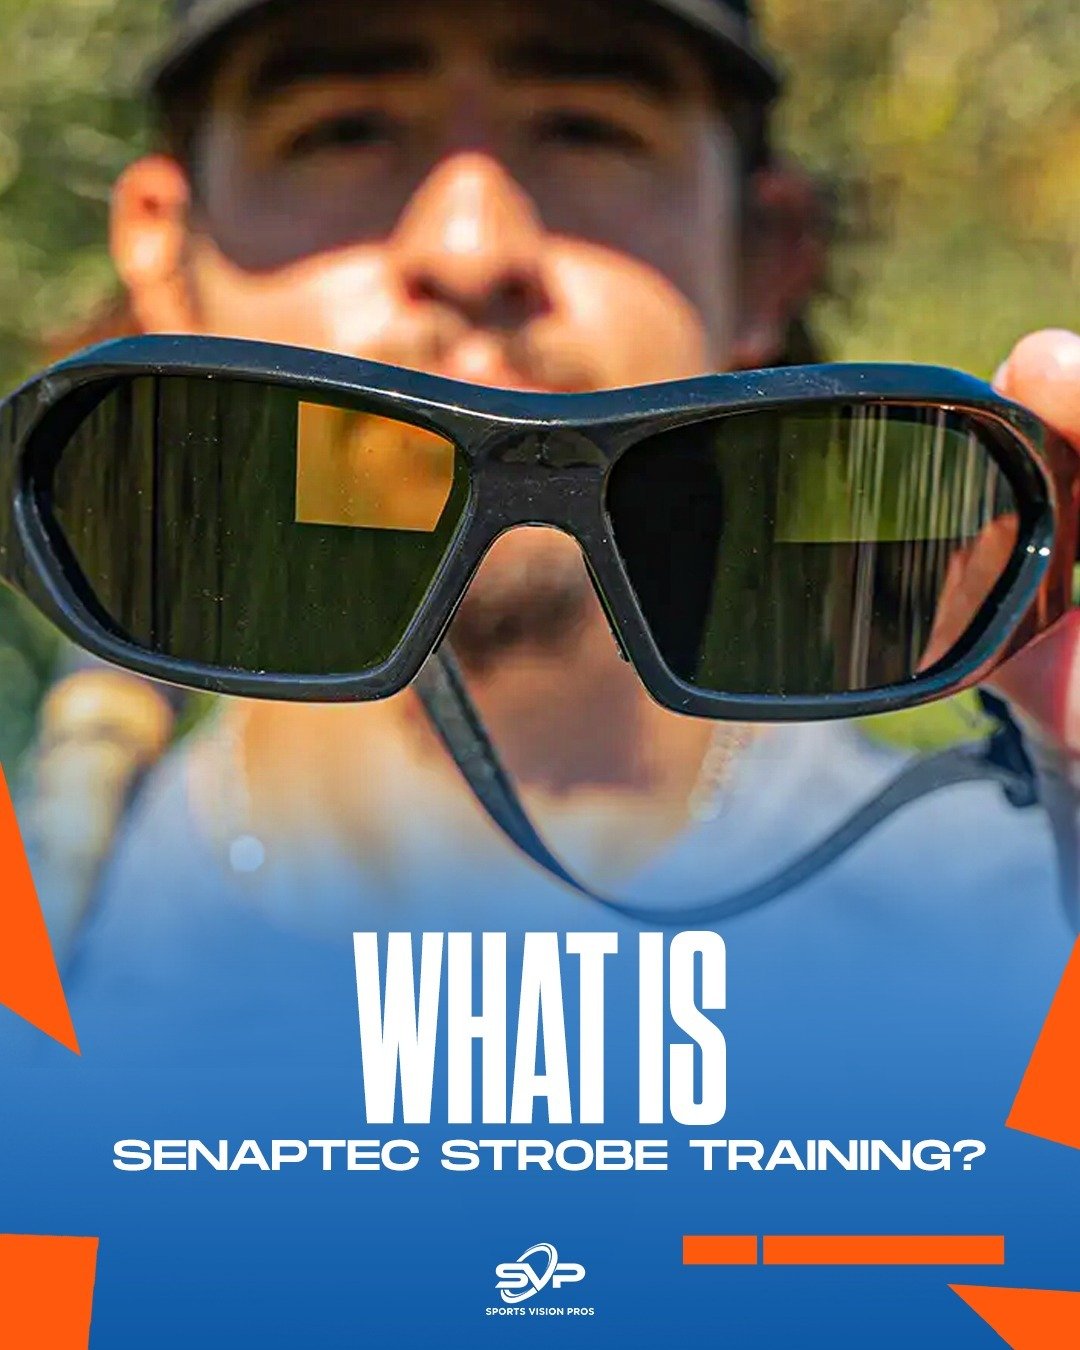 🔥 Level Up Your Game with Senaptec Strobe Training! 🏆👁️⁠
⁠
Imagine a training regimen that not only hones your physical skills but also sharpens your mental acuity. That's exactly what Senaptec Strobe Training offers. These specialized strobe glas